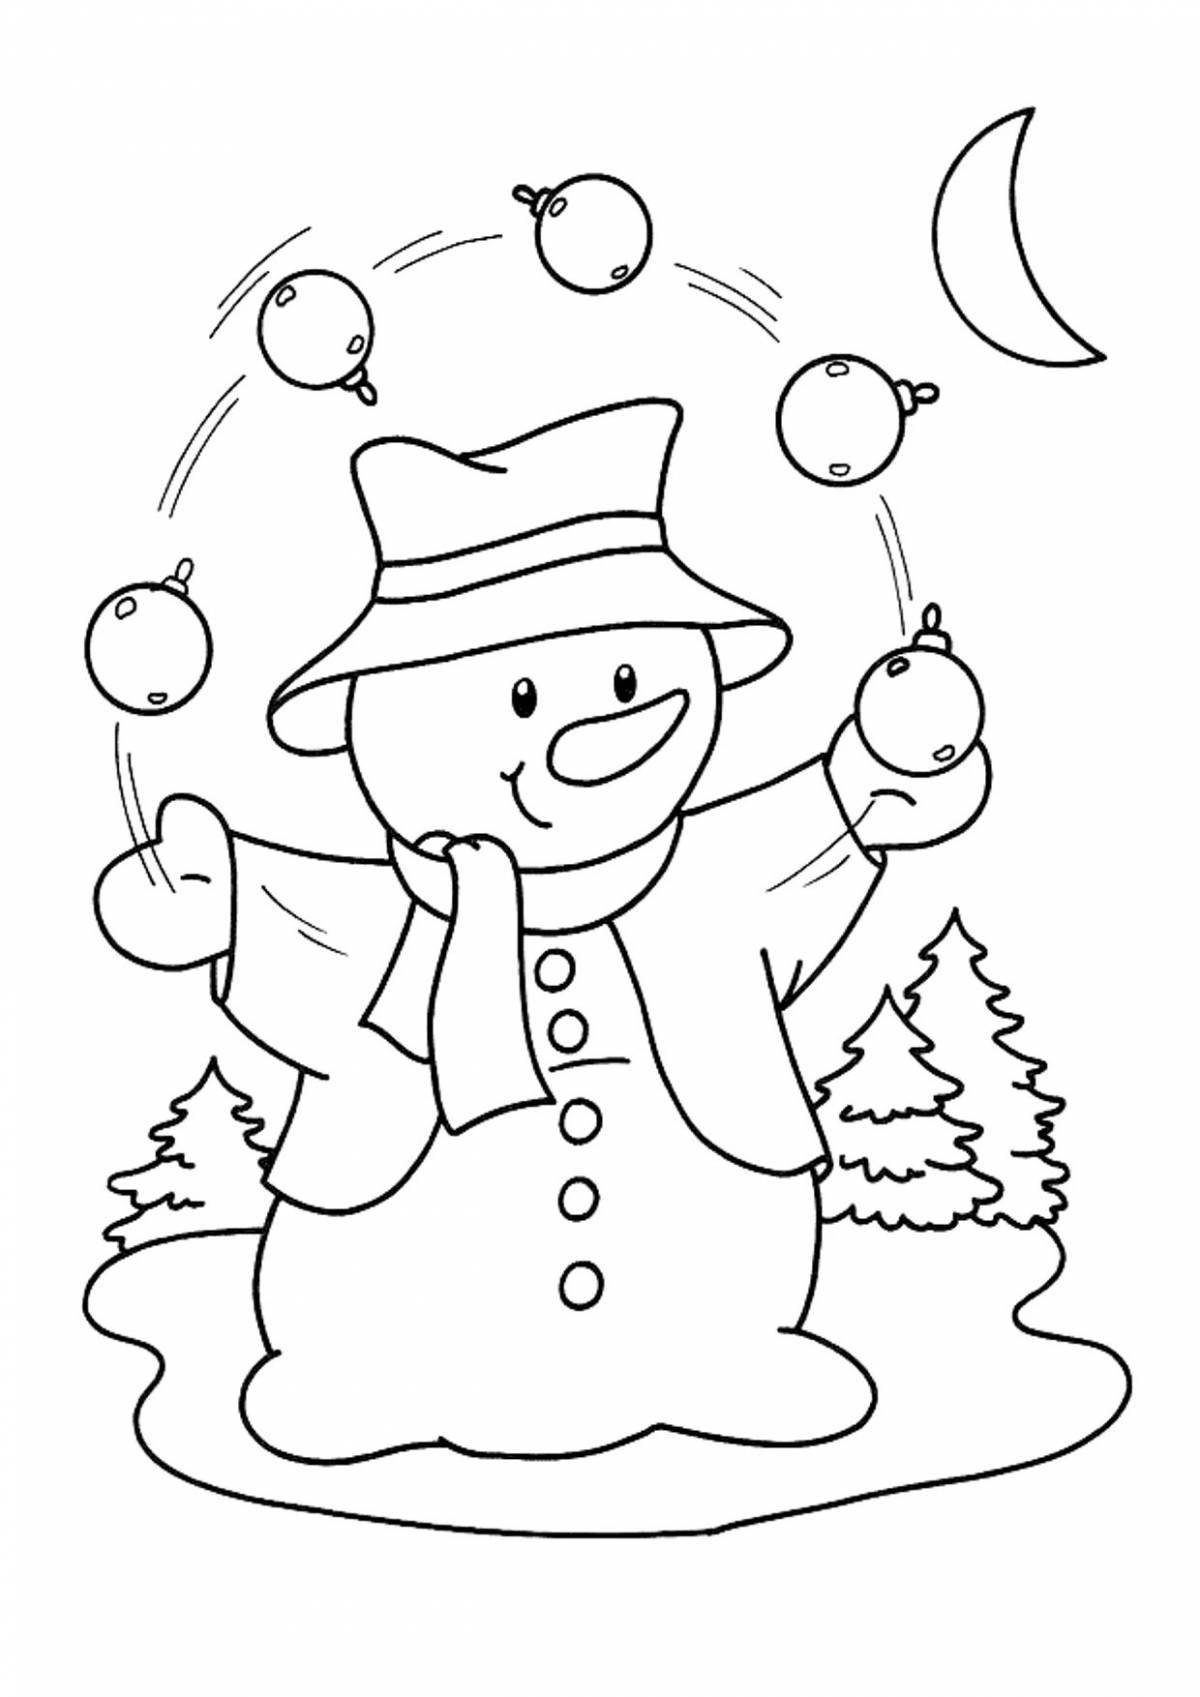 Dazzling Christmas snowman coloring page